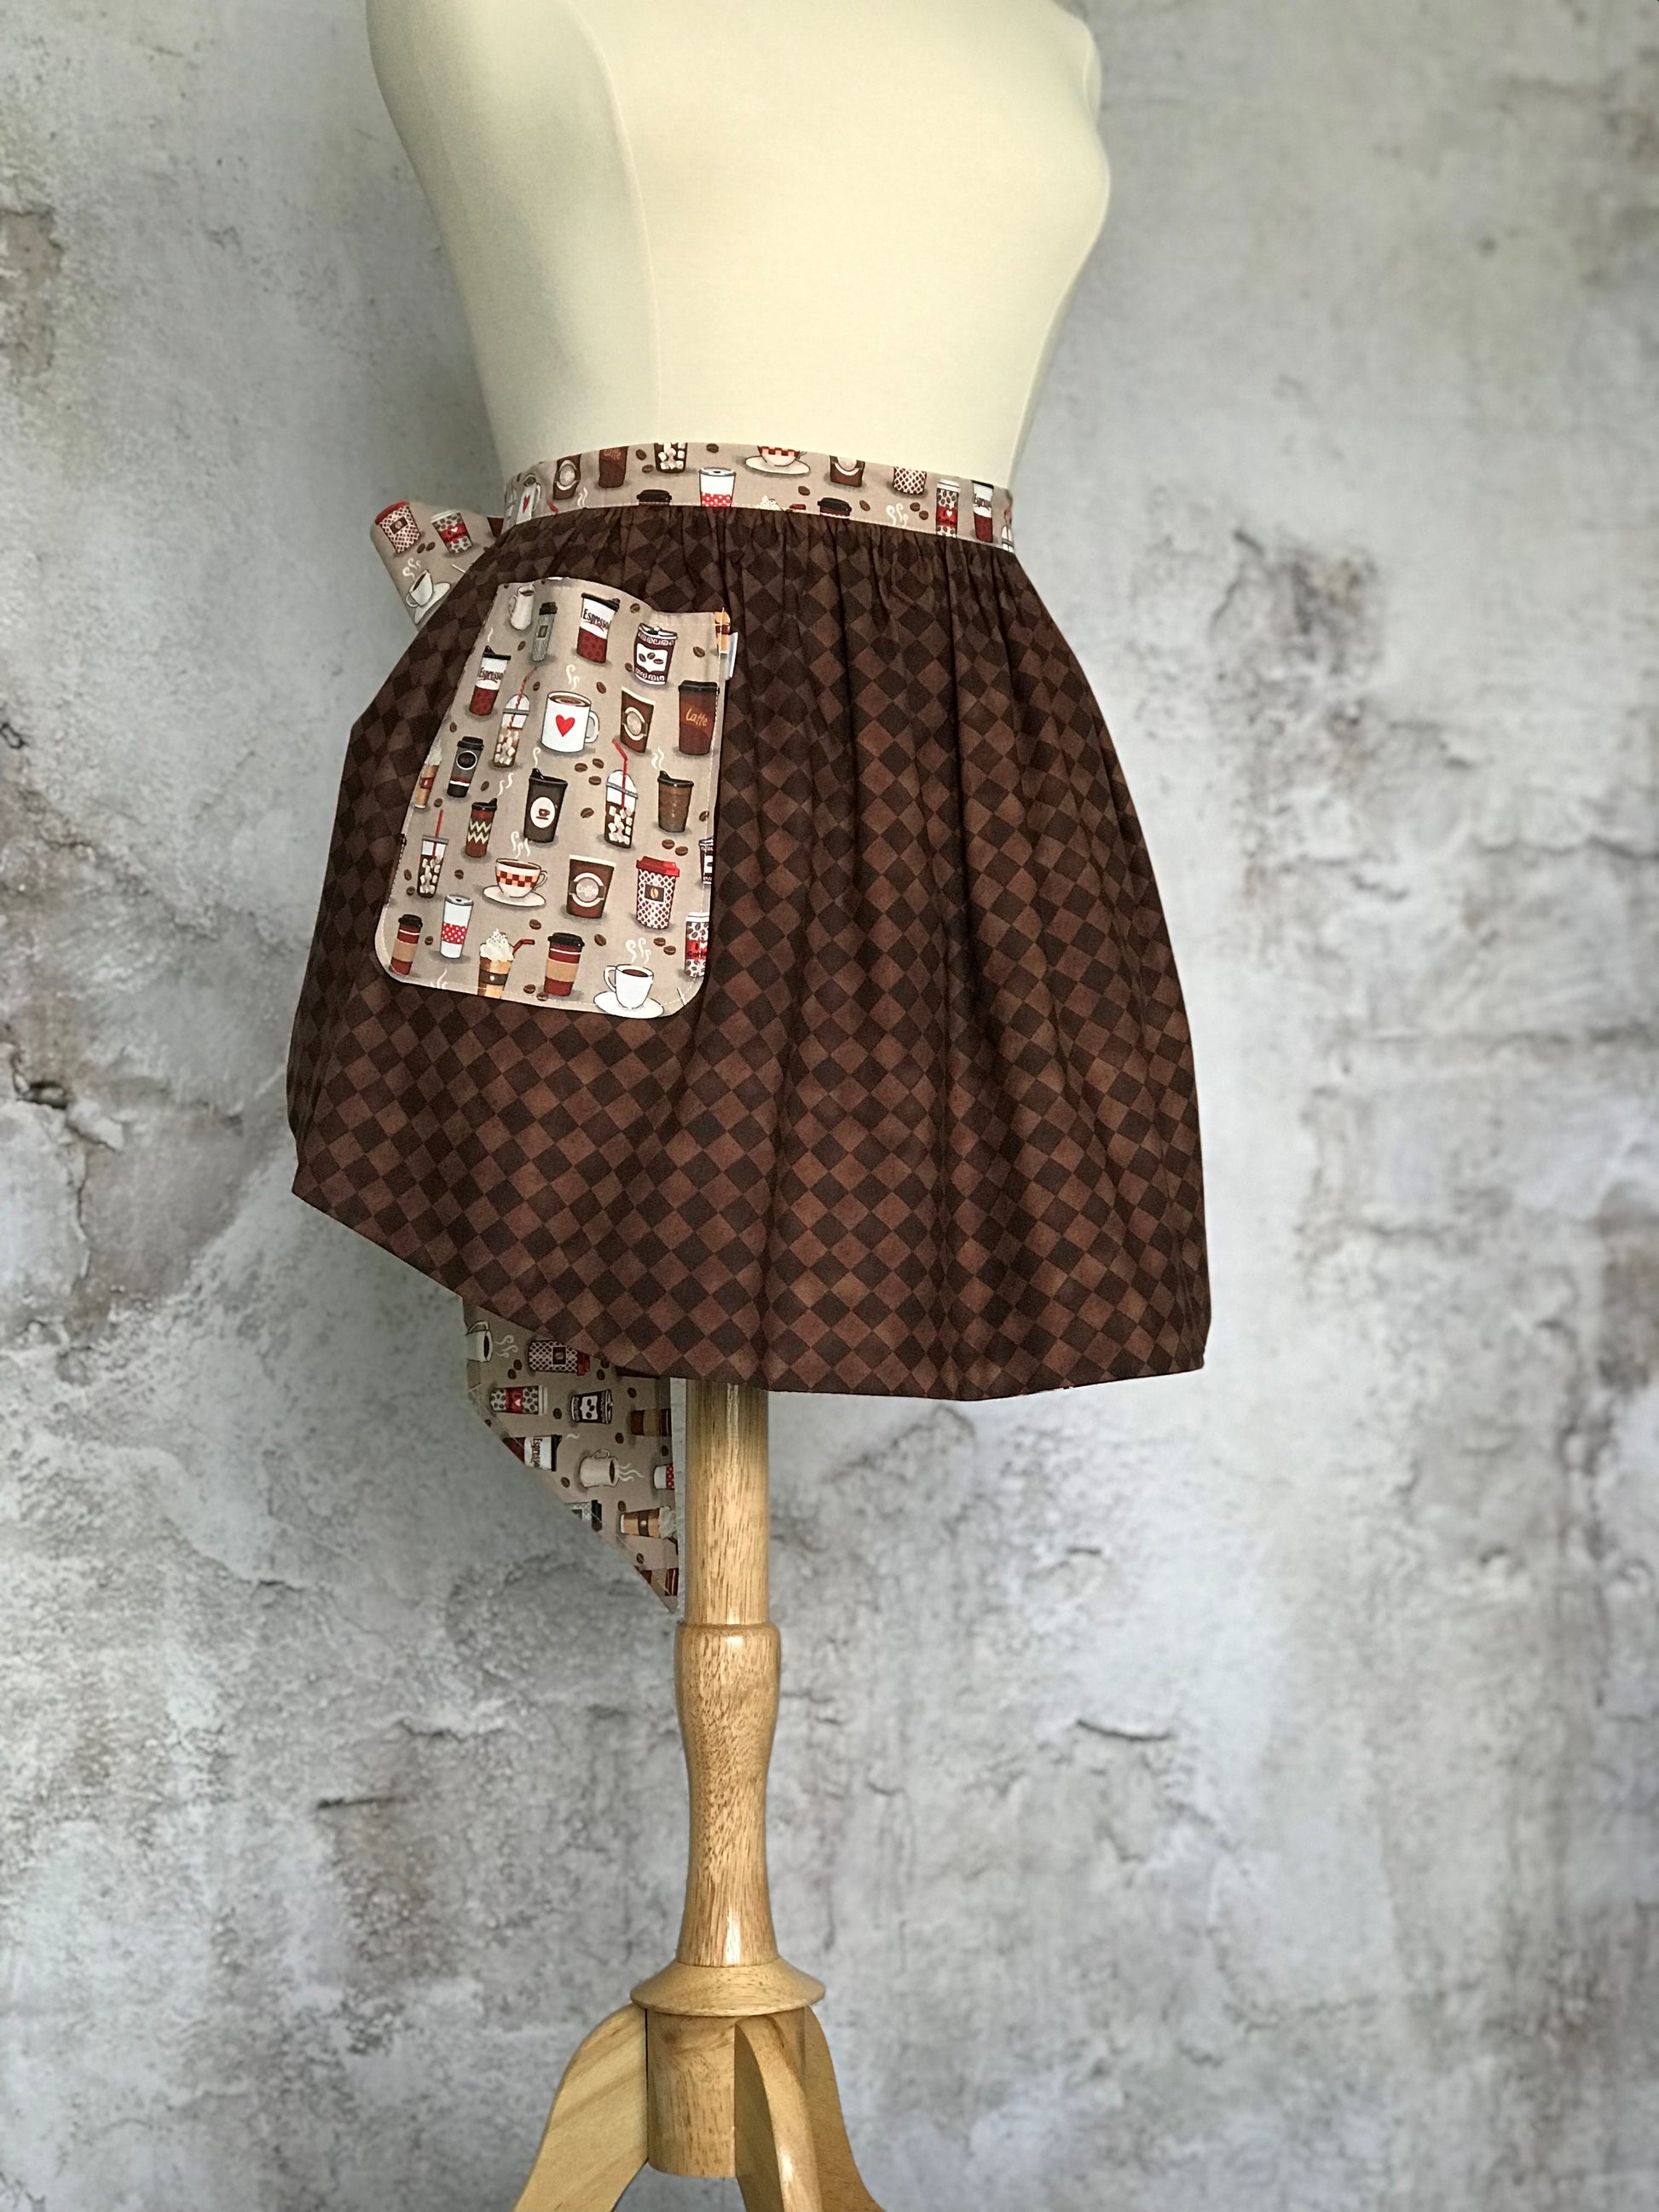 Elsie’s Diva Apron is a double-sided kitchen apron featuring generously sized pockets, 100% high quality cotton fabric, and long waist ties to make this apron well suited for most figures. Coffee cups and coffee quotes adorn this fun apron.